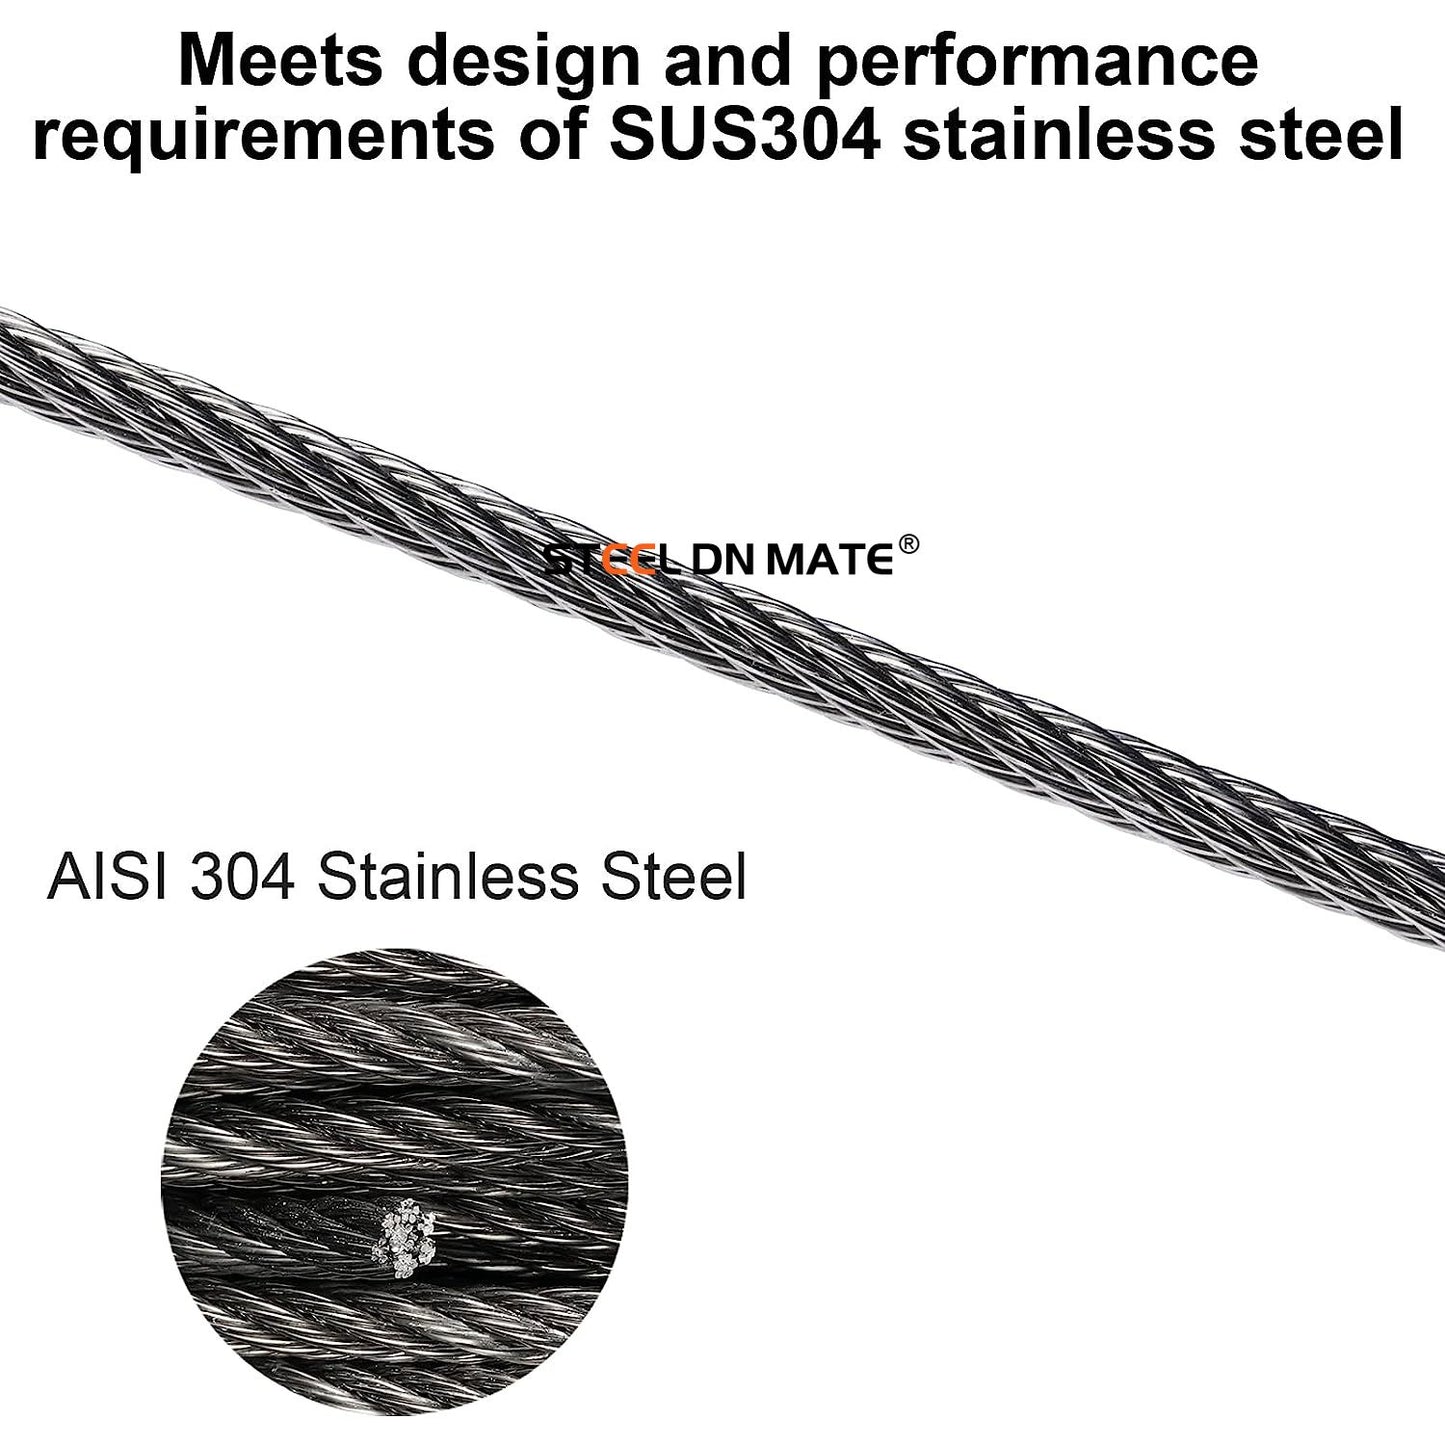 Steel DN Mate 220 Feet 1/8" Stainless Steel Aircraft Wire Rope for Cable Railing Kit Stair Railing, DIY Balustrade, 1800 lb Breaking Strength, 304 Stainless Steel Deck Railing Wire with Cutter